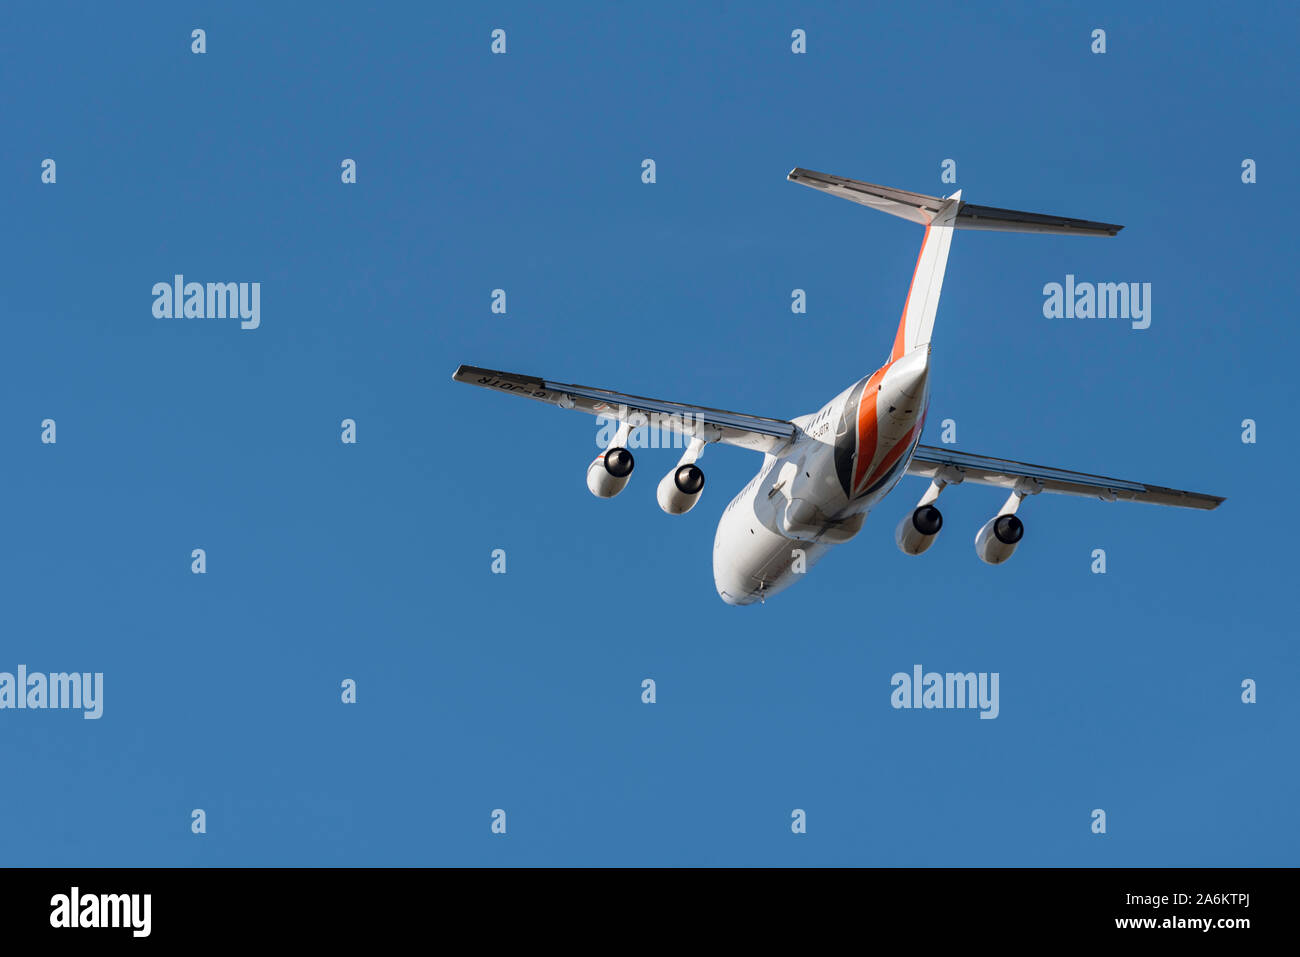 JOTA Aviation BAE Avro RJ85 taking off at London Southend Airport, Essex, UK. Ad hoc charter airline jet plane climbing into blue sky. Space for copy Stock Photo